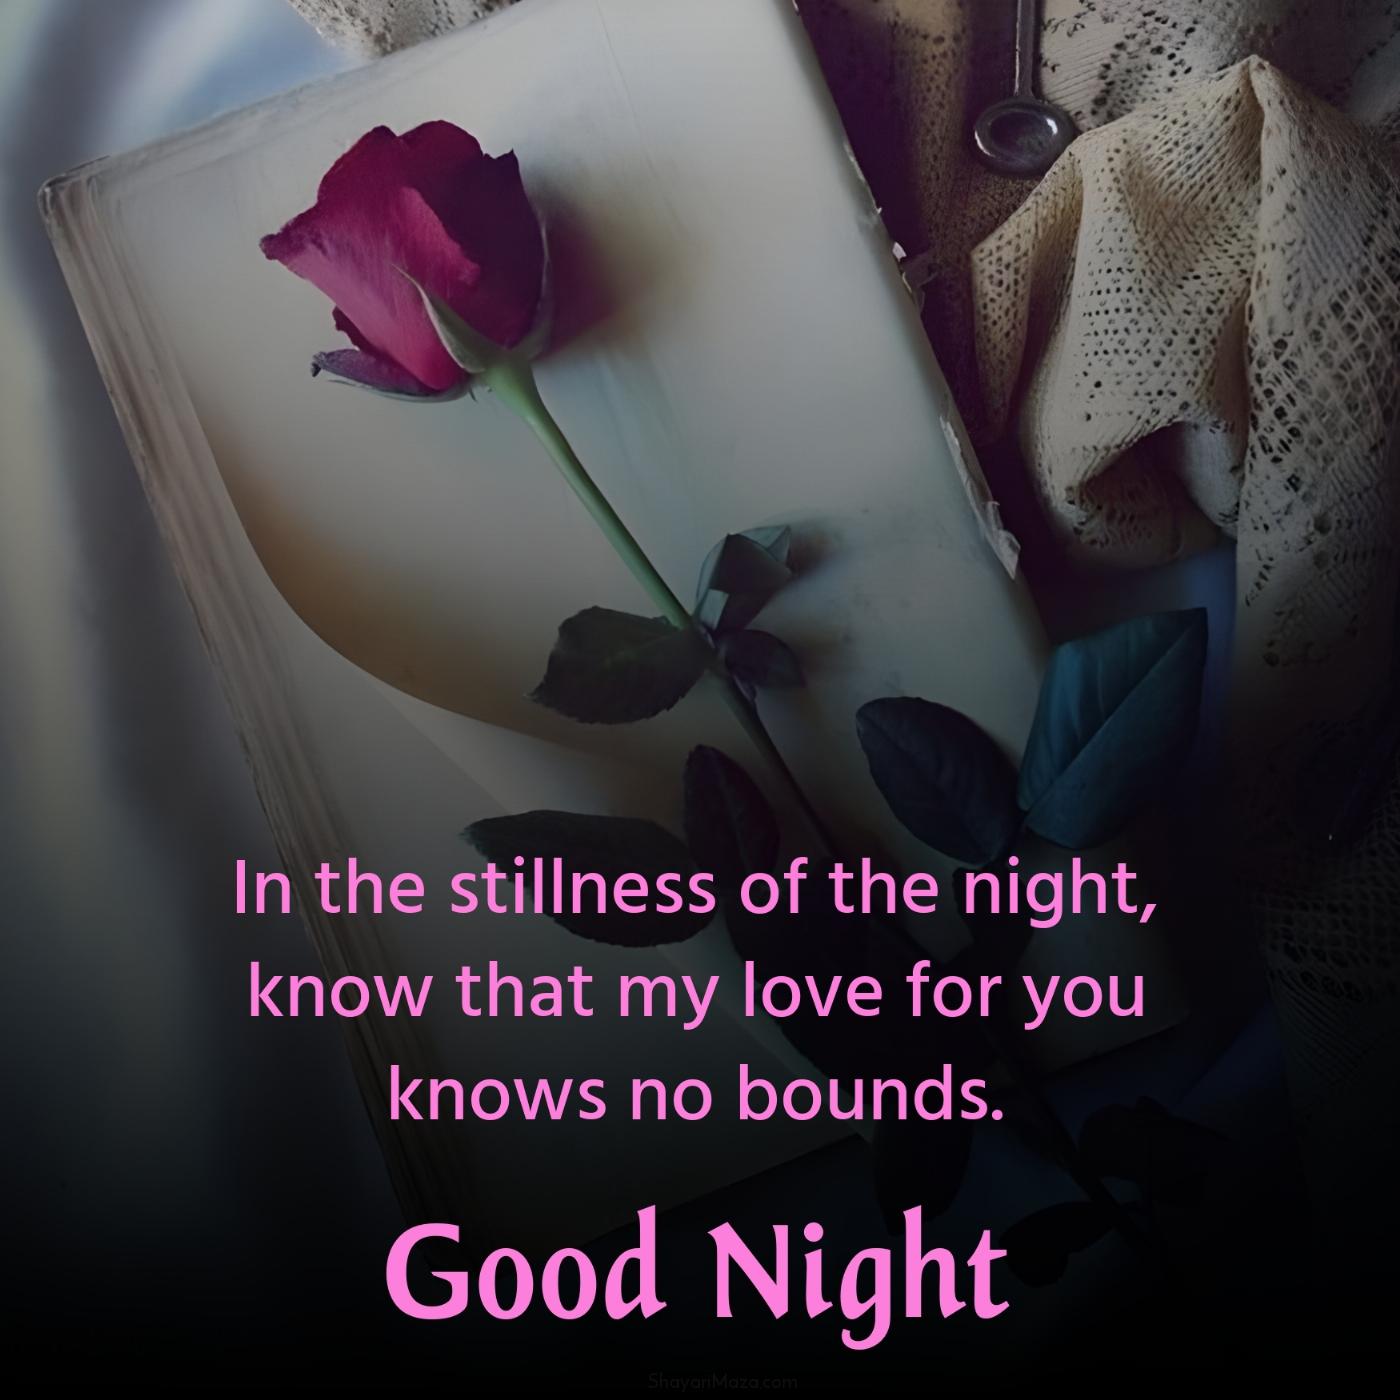 In the stillness of the night know that my love for you